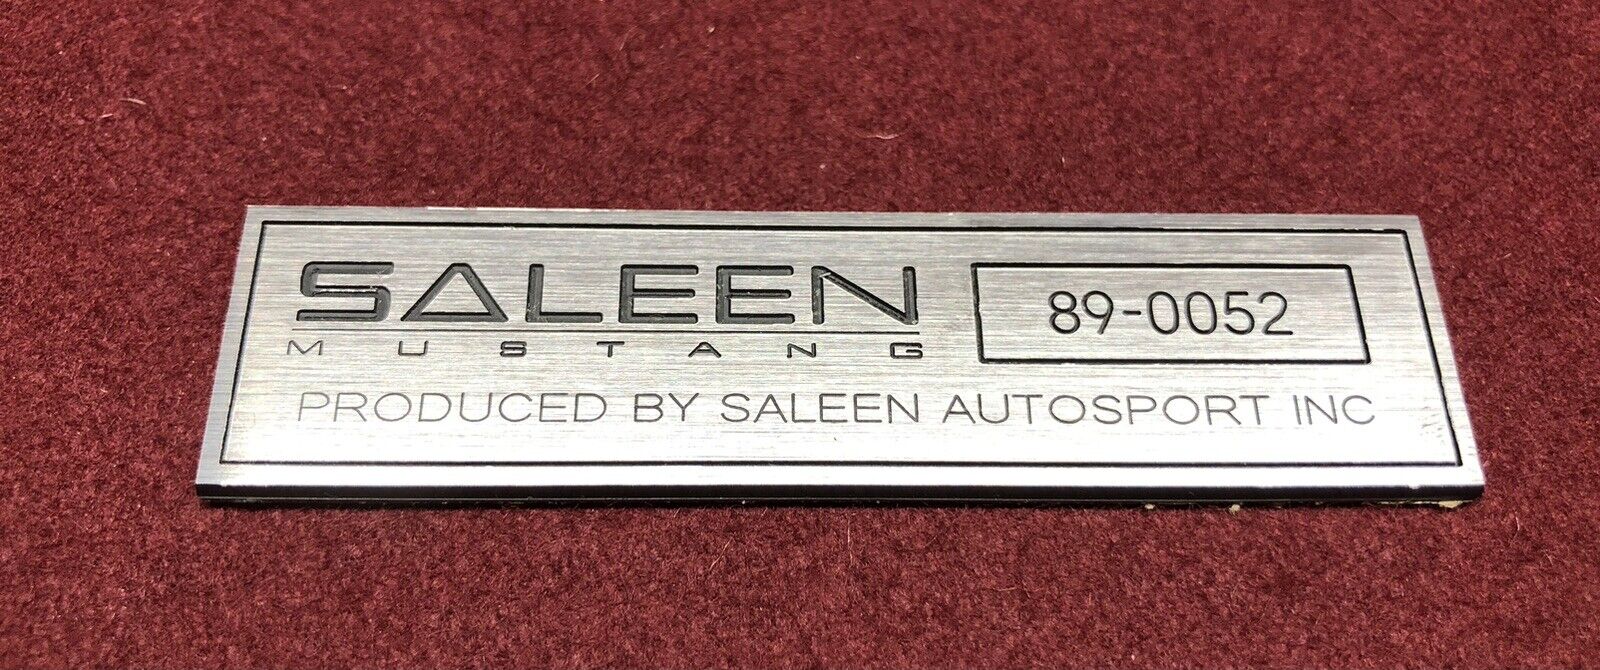 Custom console dash emblem plate SALEEN your choice of number NEW STYLE